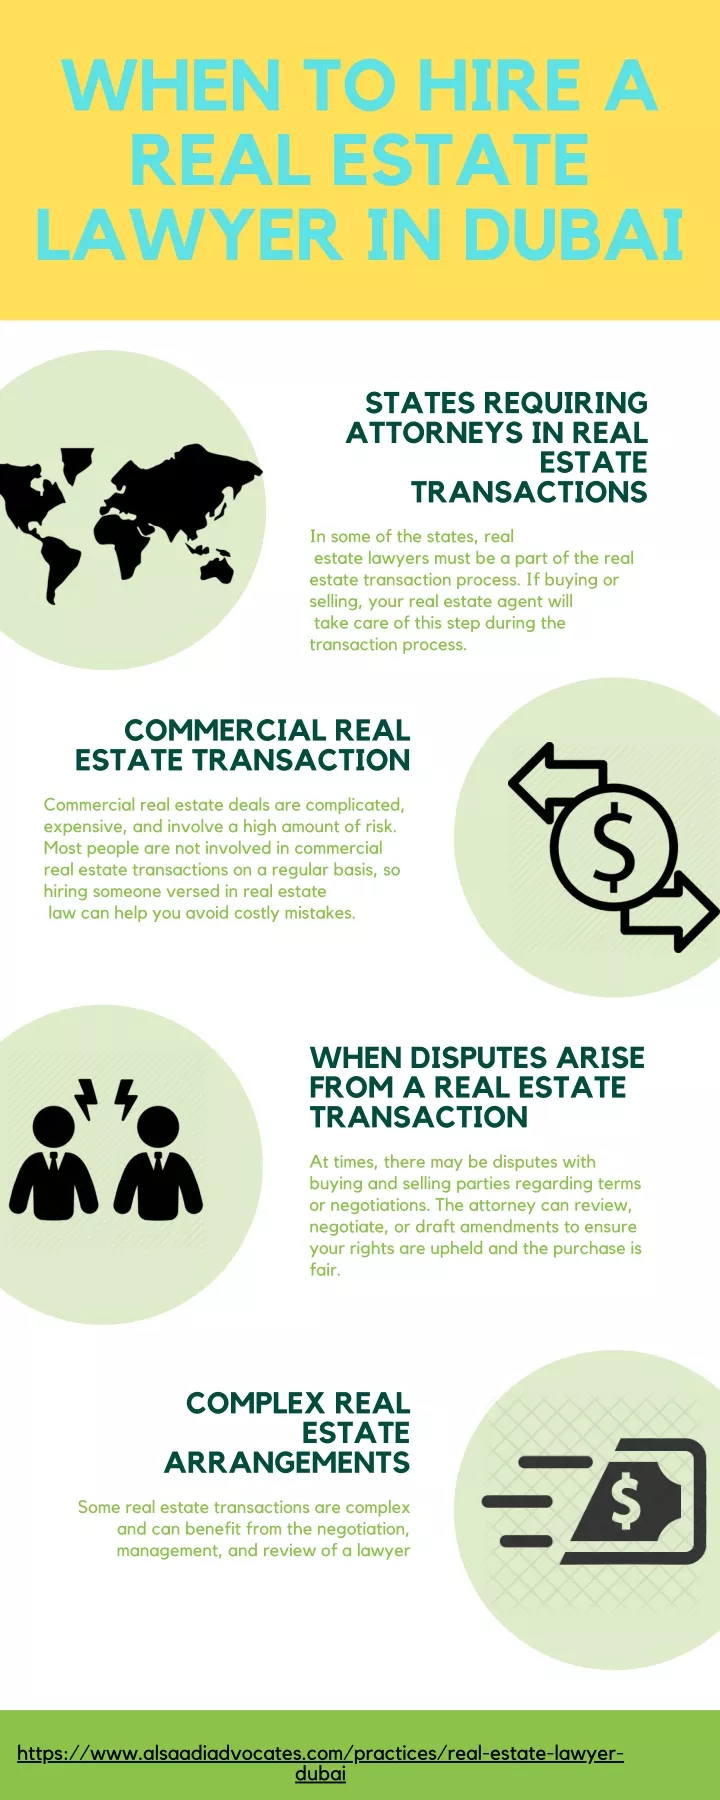 when to hire a real estate lawyer in dubai